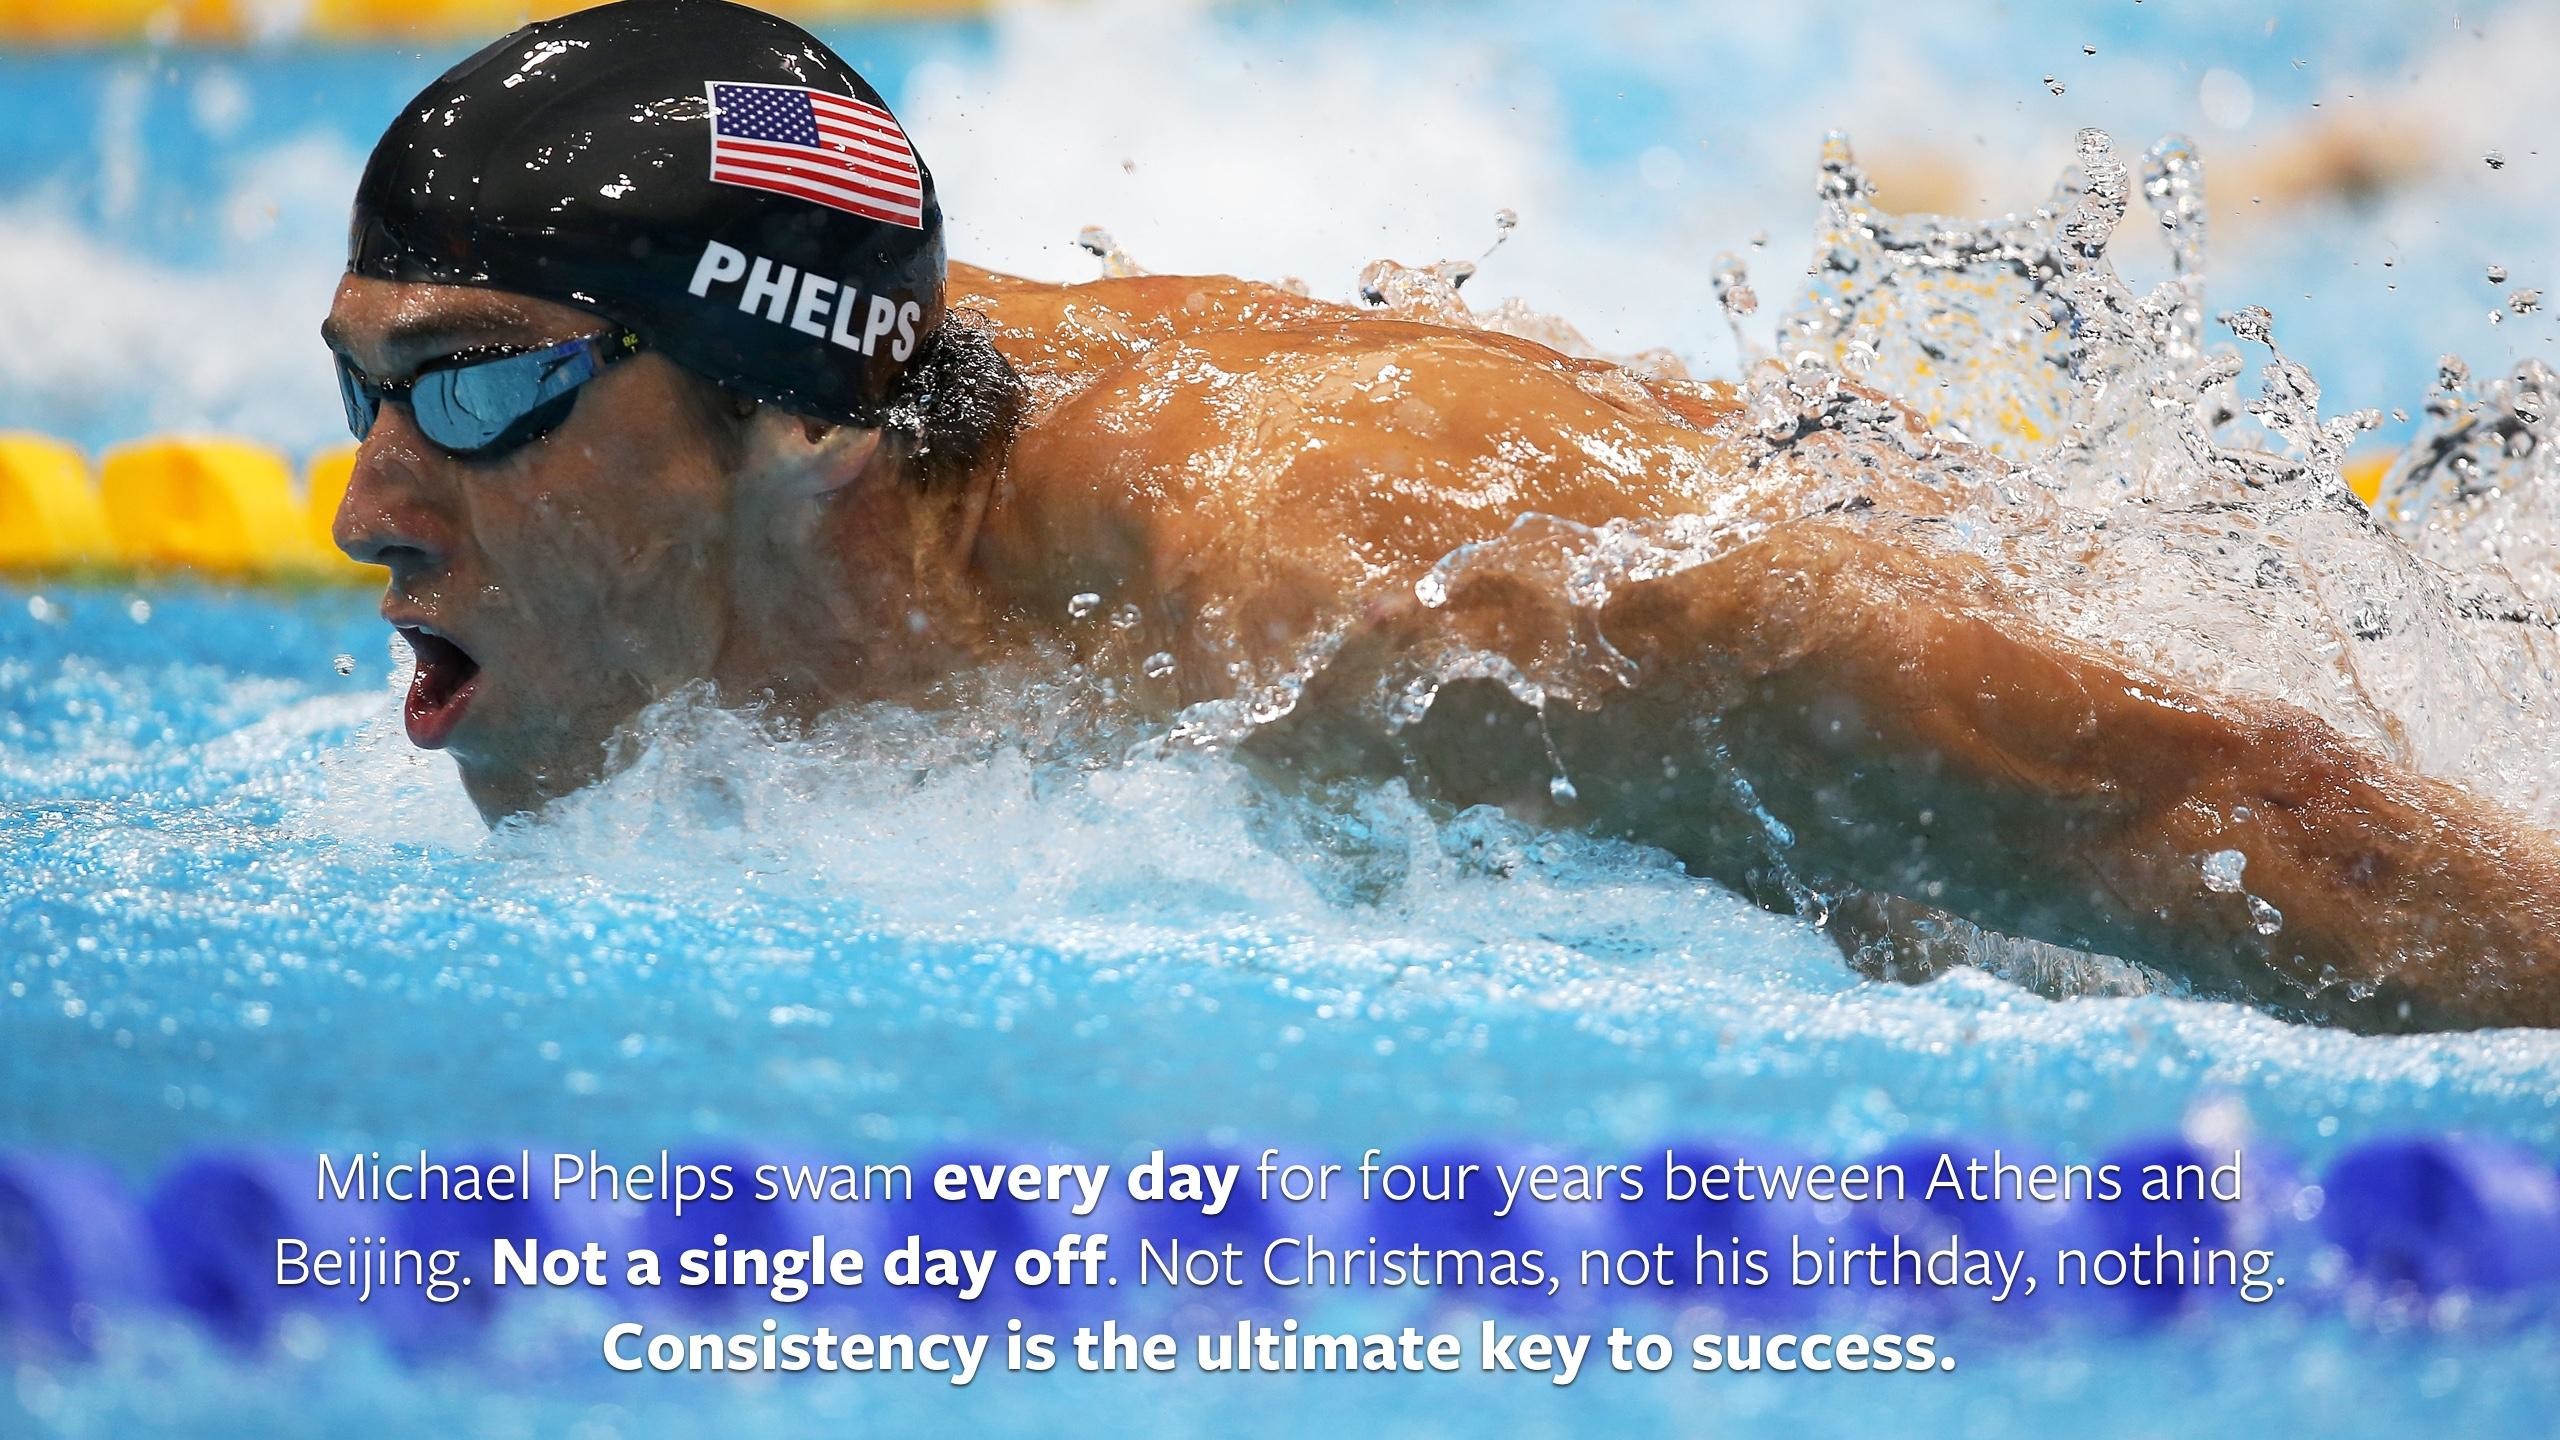 2560x1440 Loved that quote about Michael Phelps swimming every day, made a wallpaper  ...